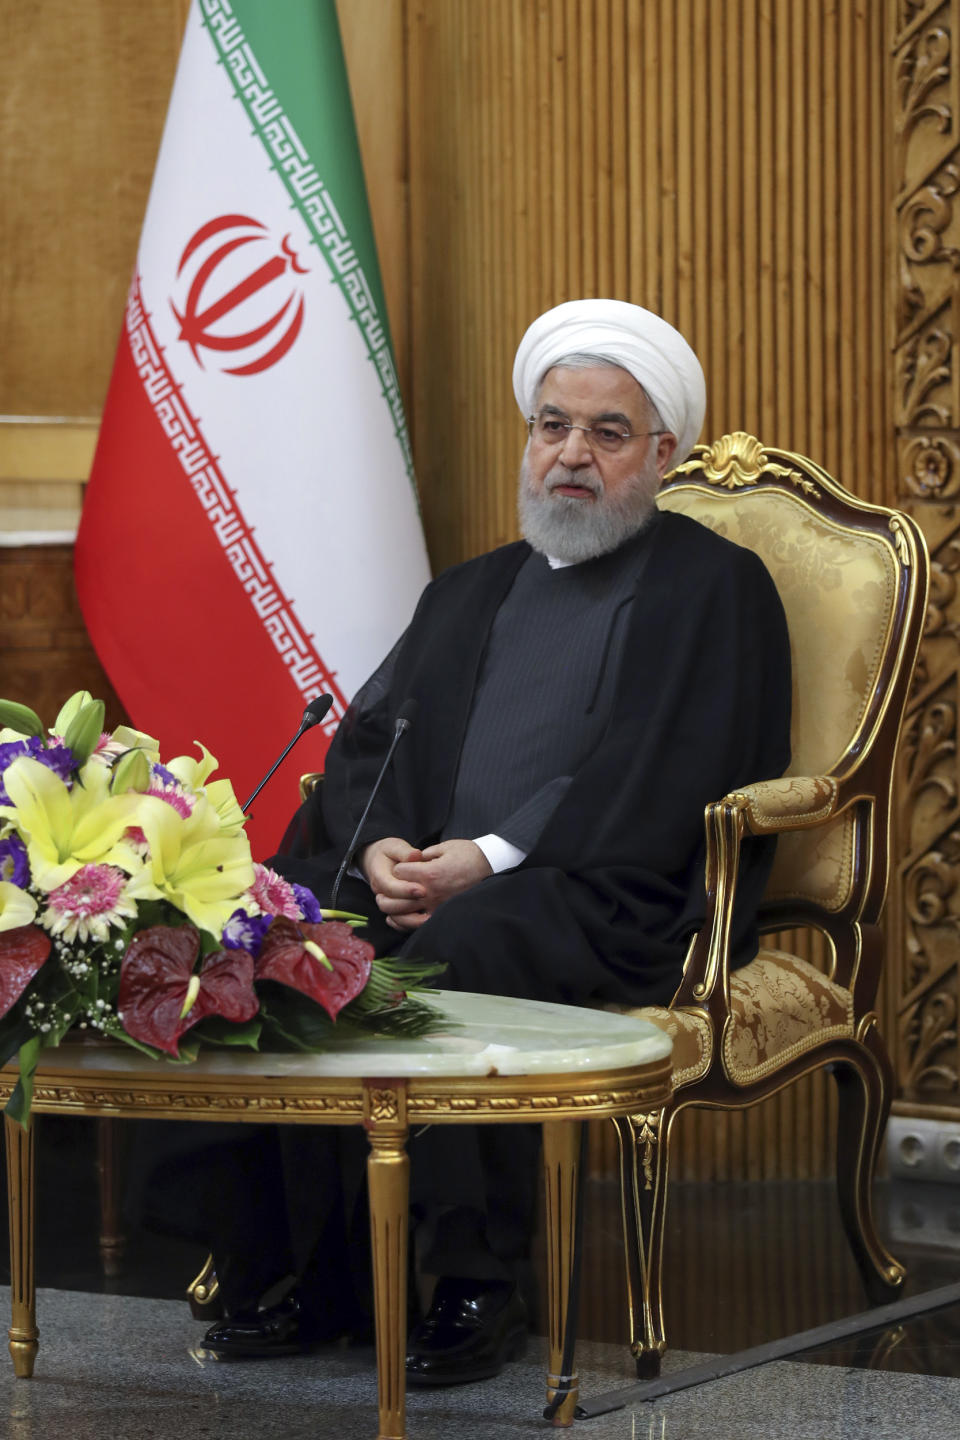 In this photo released by the official website of the office of the Iranian Presidency, President Hassan Rouhani briefs media at Mehrabad airport pavilion upon arriving in Tehran from New York, where he attended the United Nations General Assembly, Iran, Friday, Sept. 27, 2019. Rouhani said U.S. sanctions on his country are "more unstable than ever." (Iranian Presidency Office via AP)